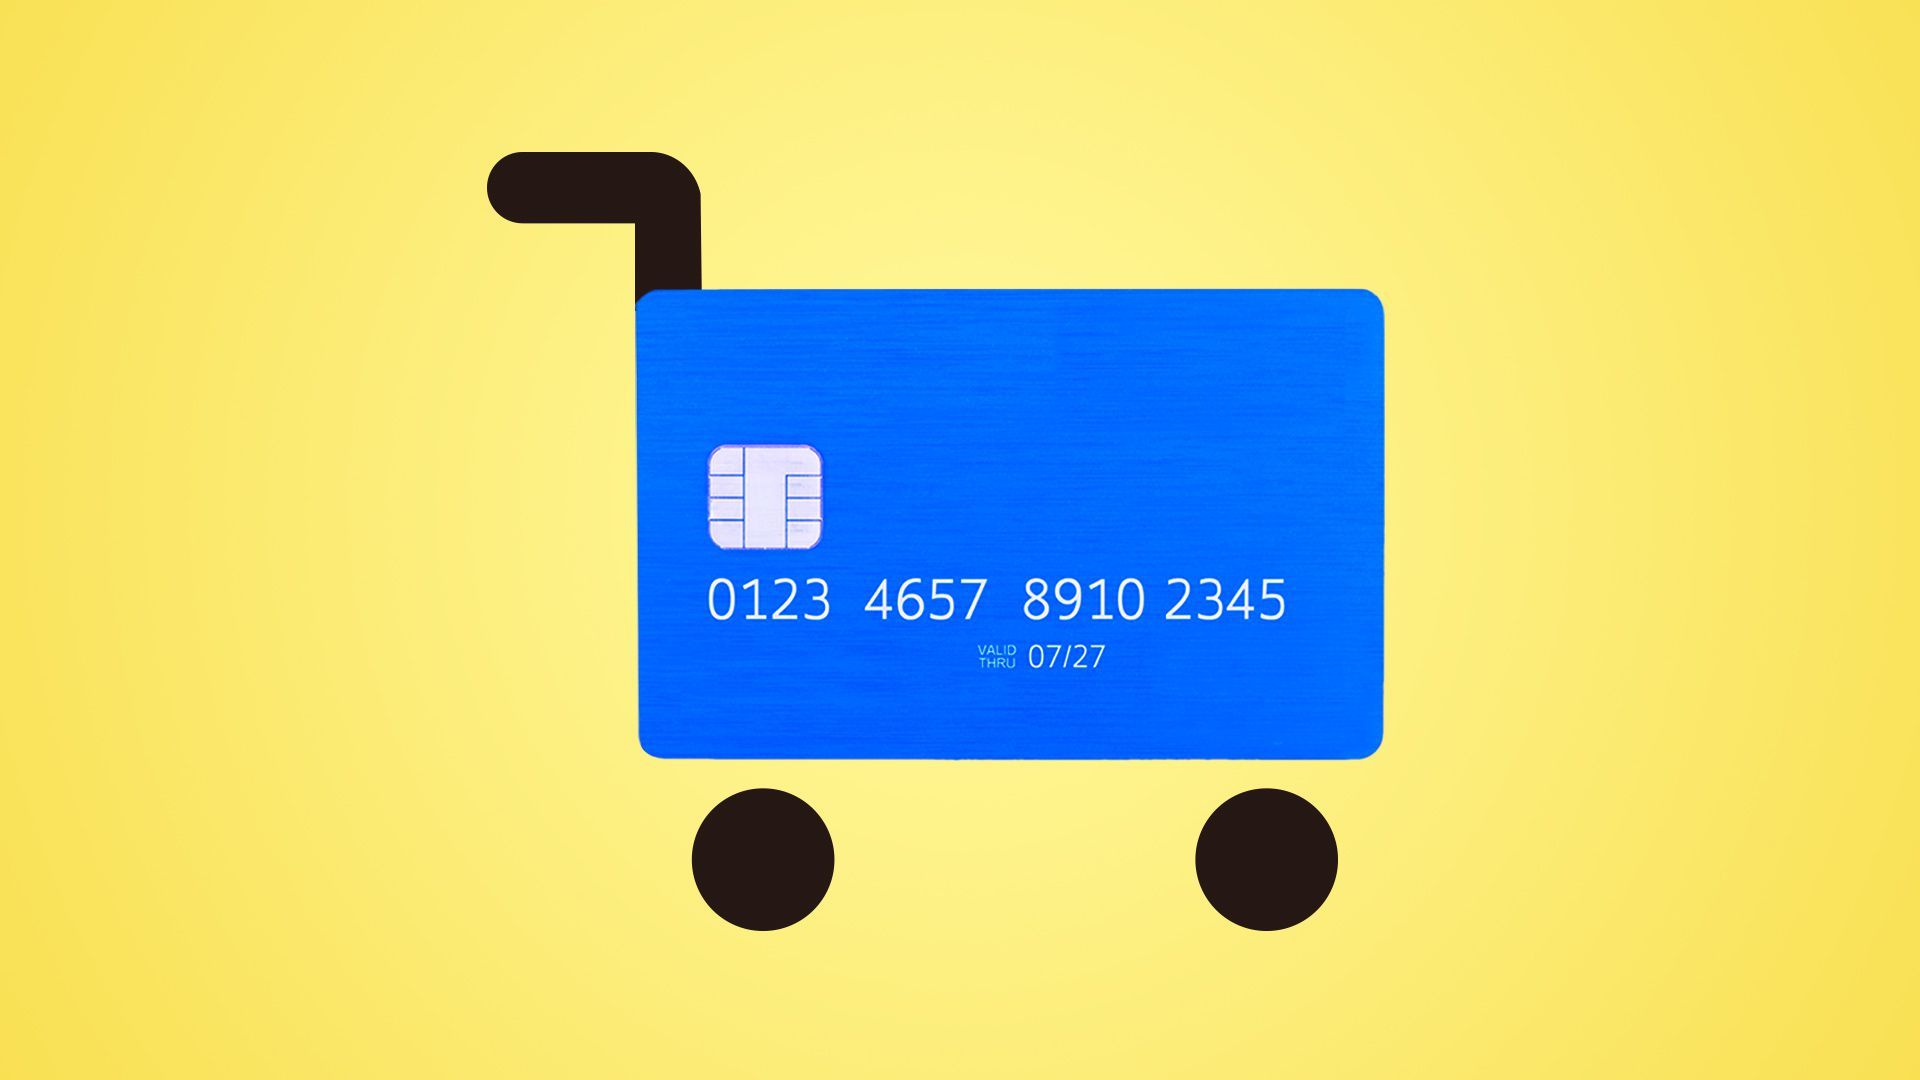 Illustration of a credit card as a shopping cart icon.